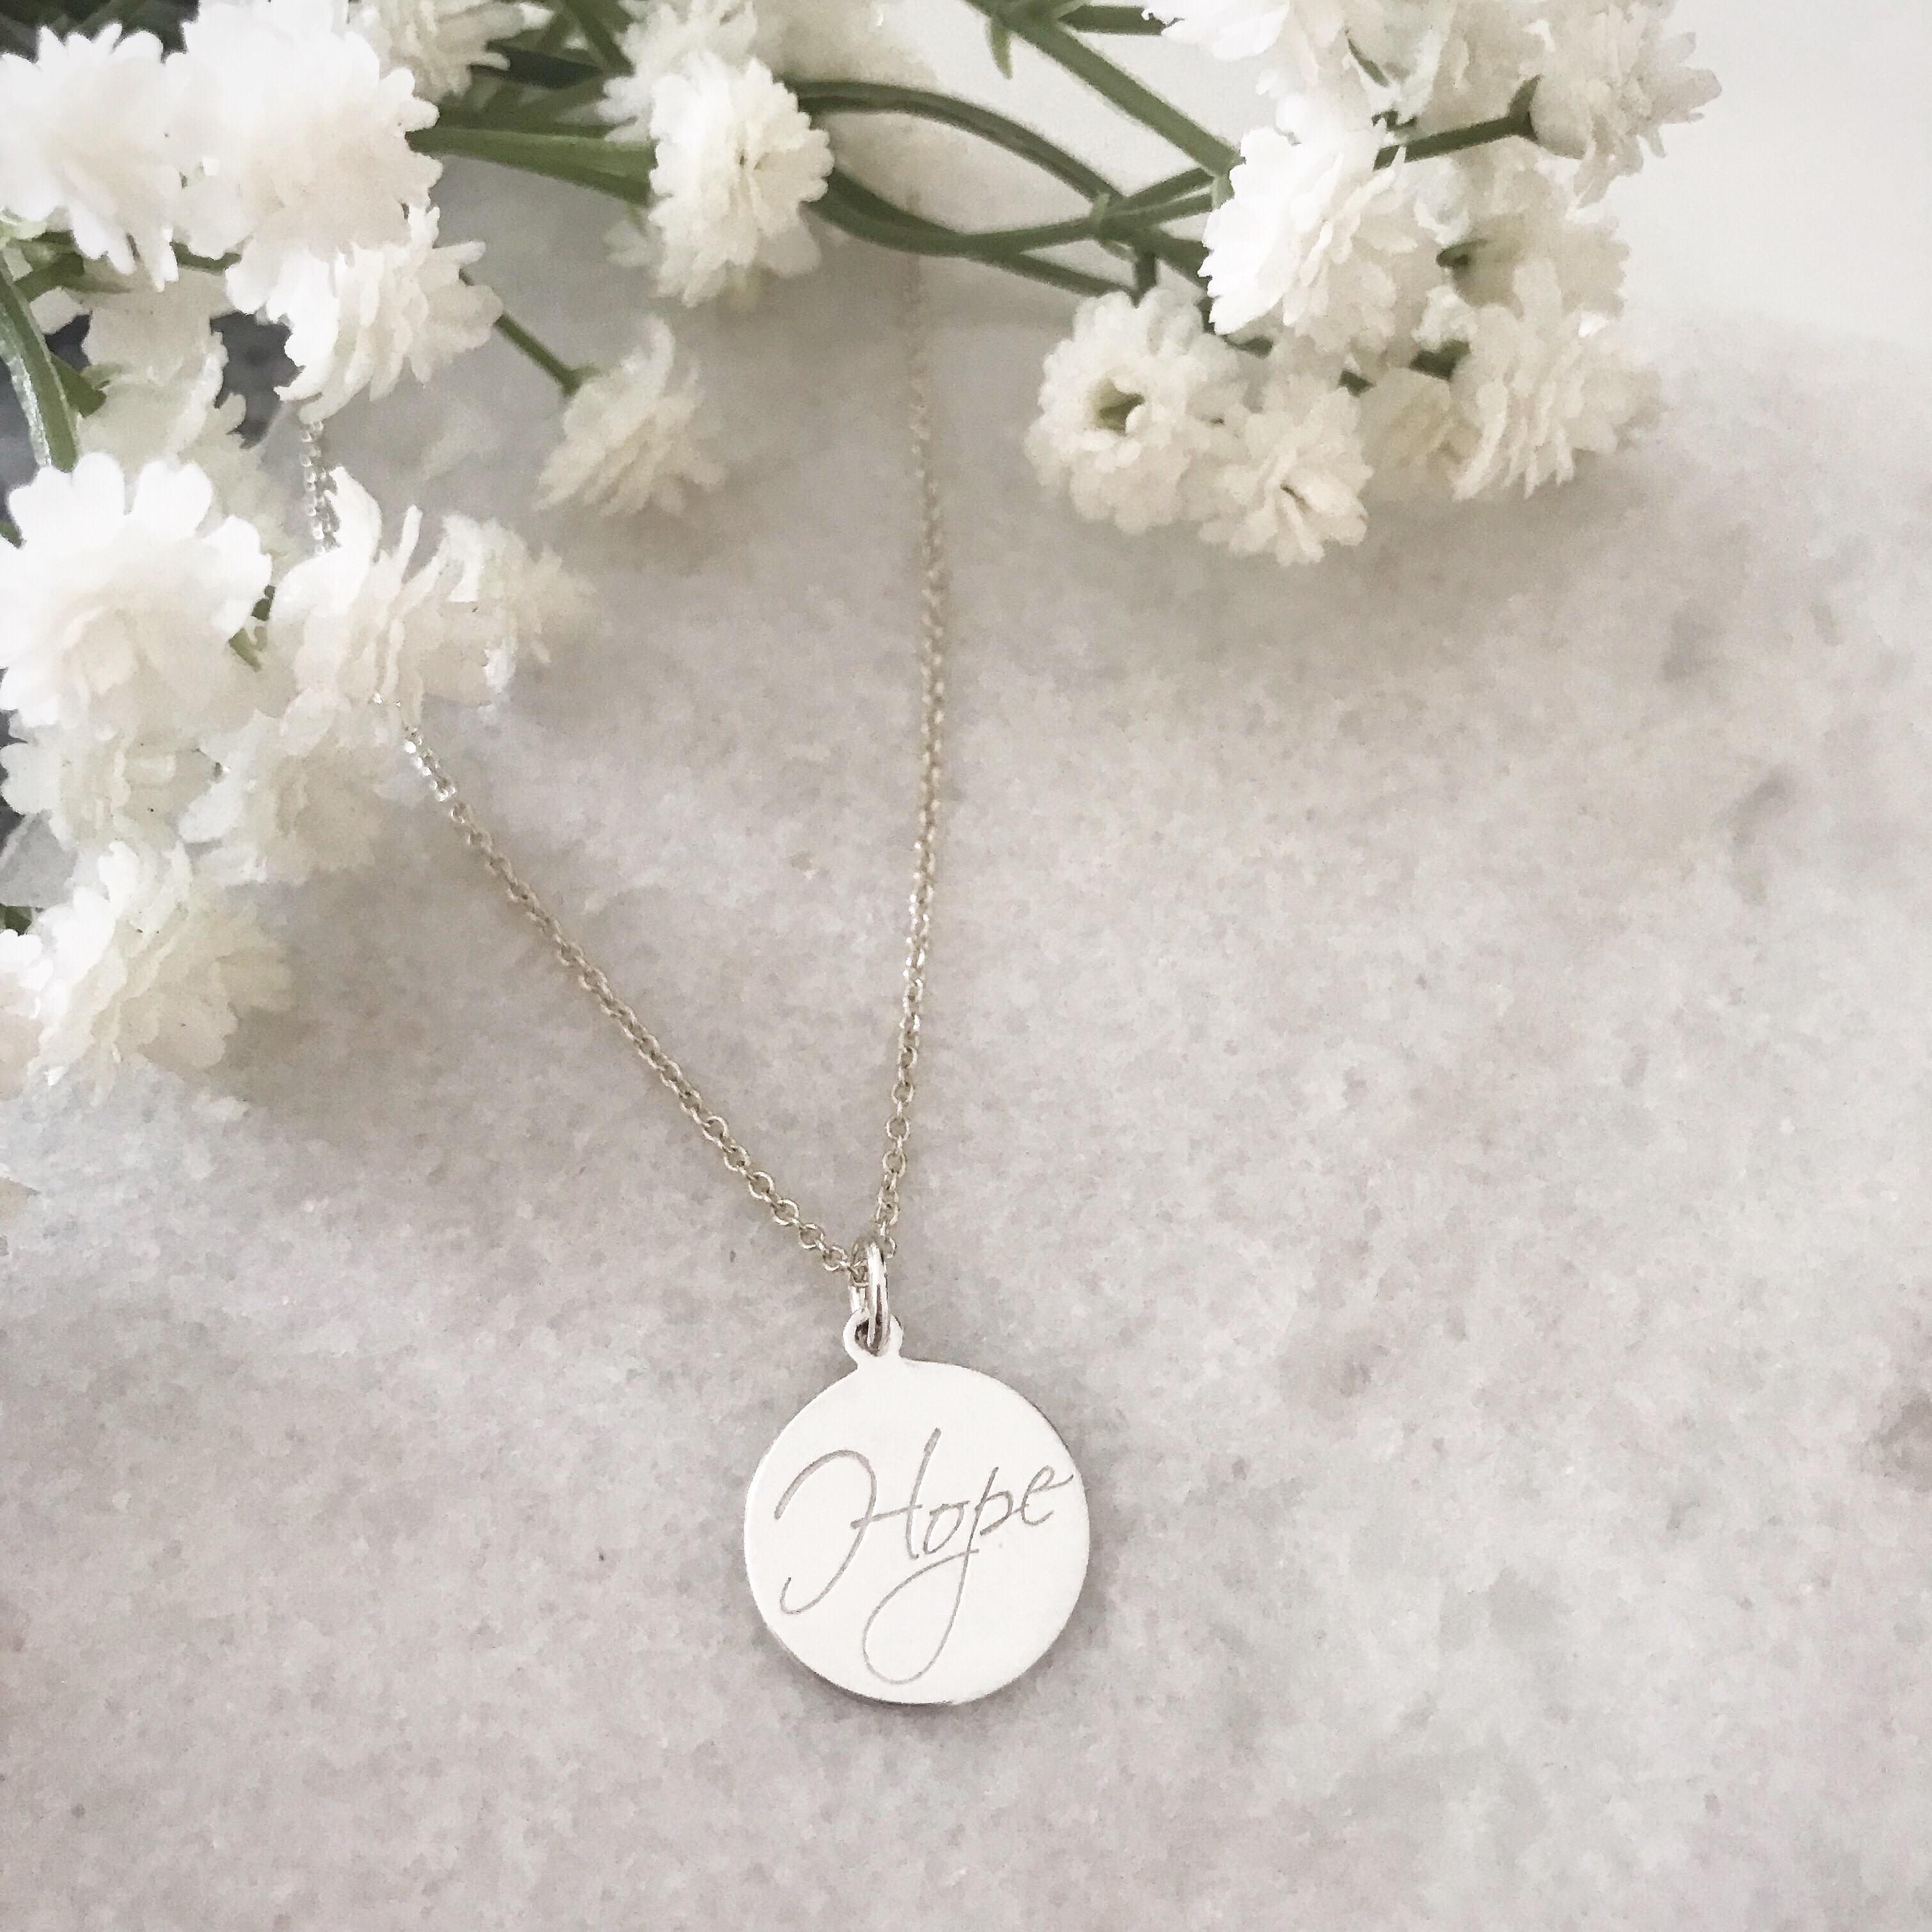 Sterling Silver Hope Necklace - Engraved Pendant - Wisteria London